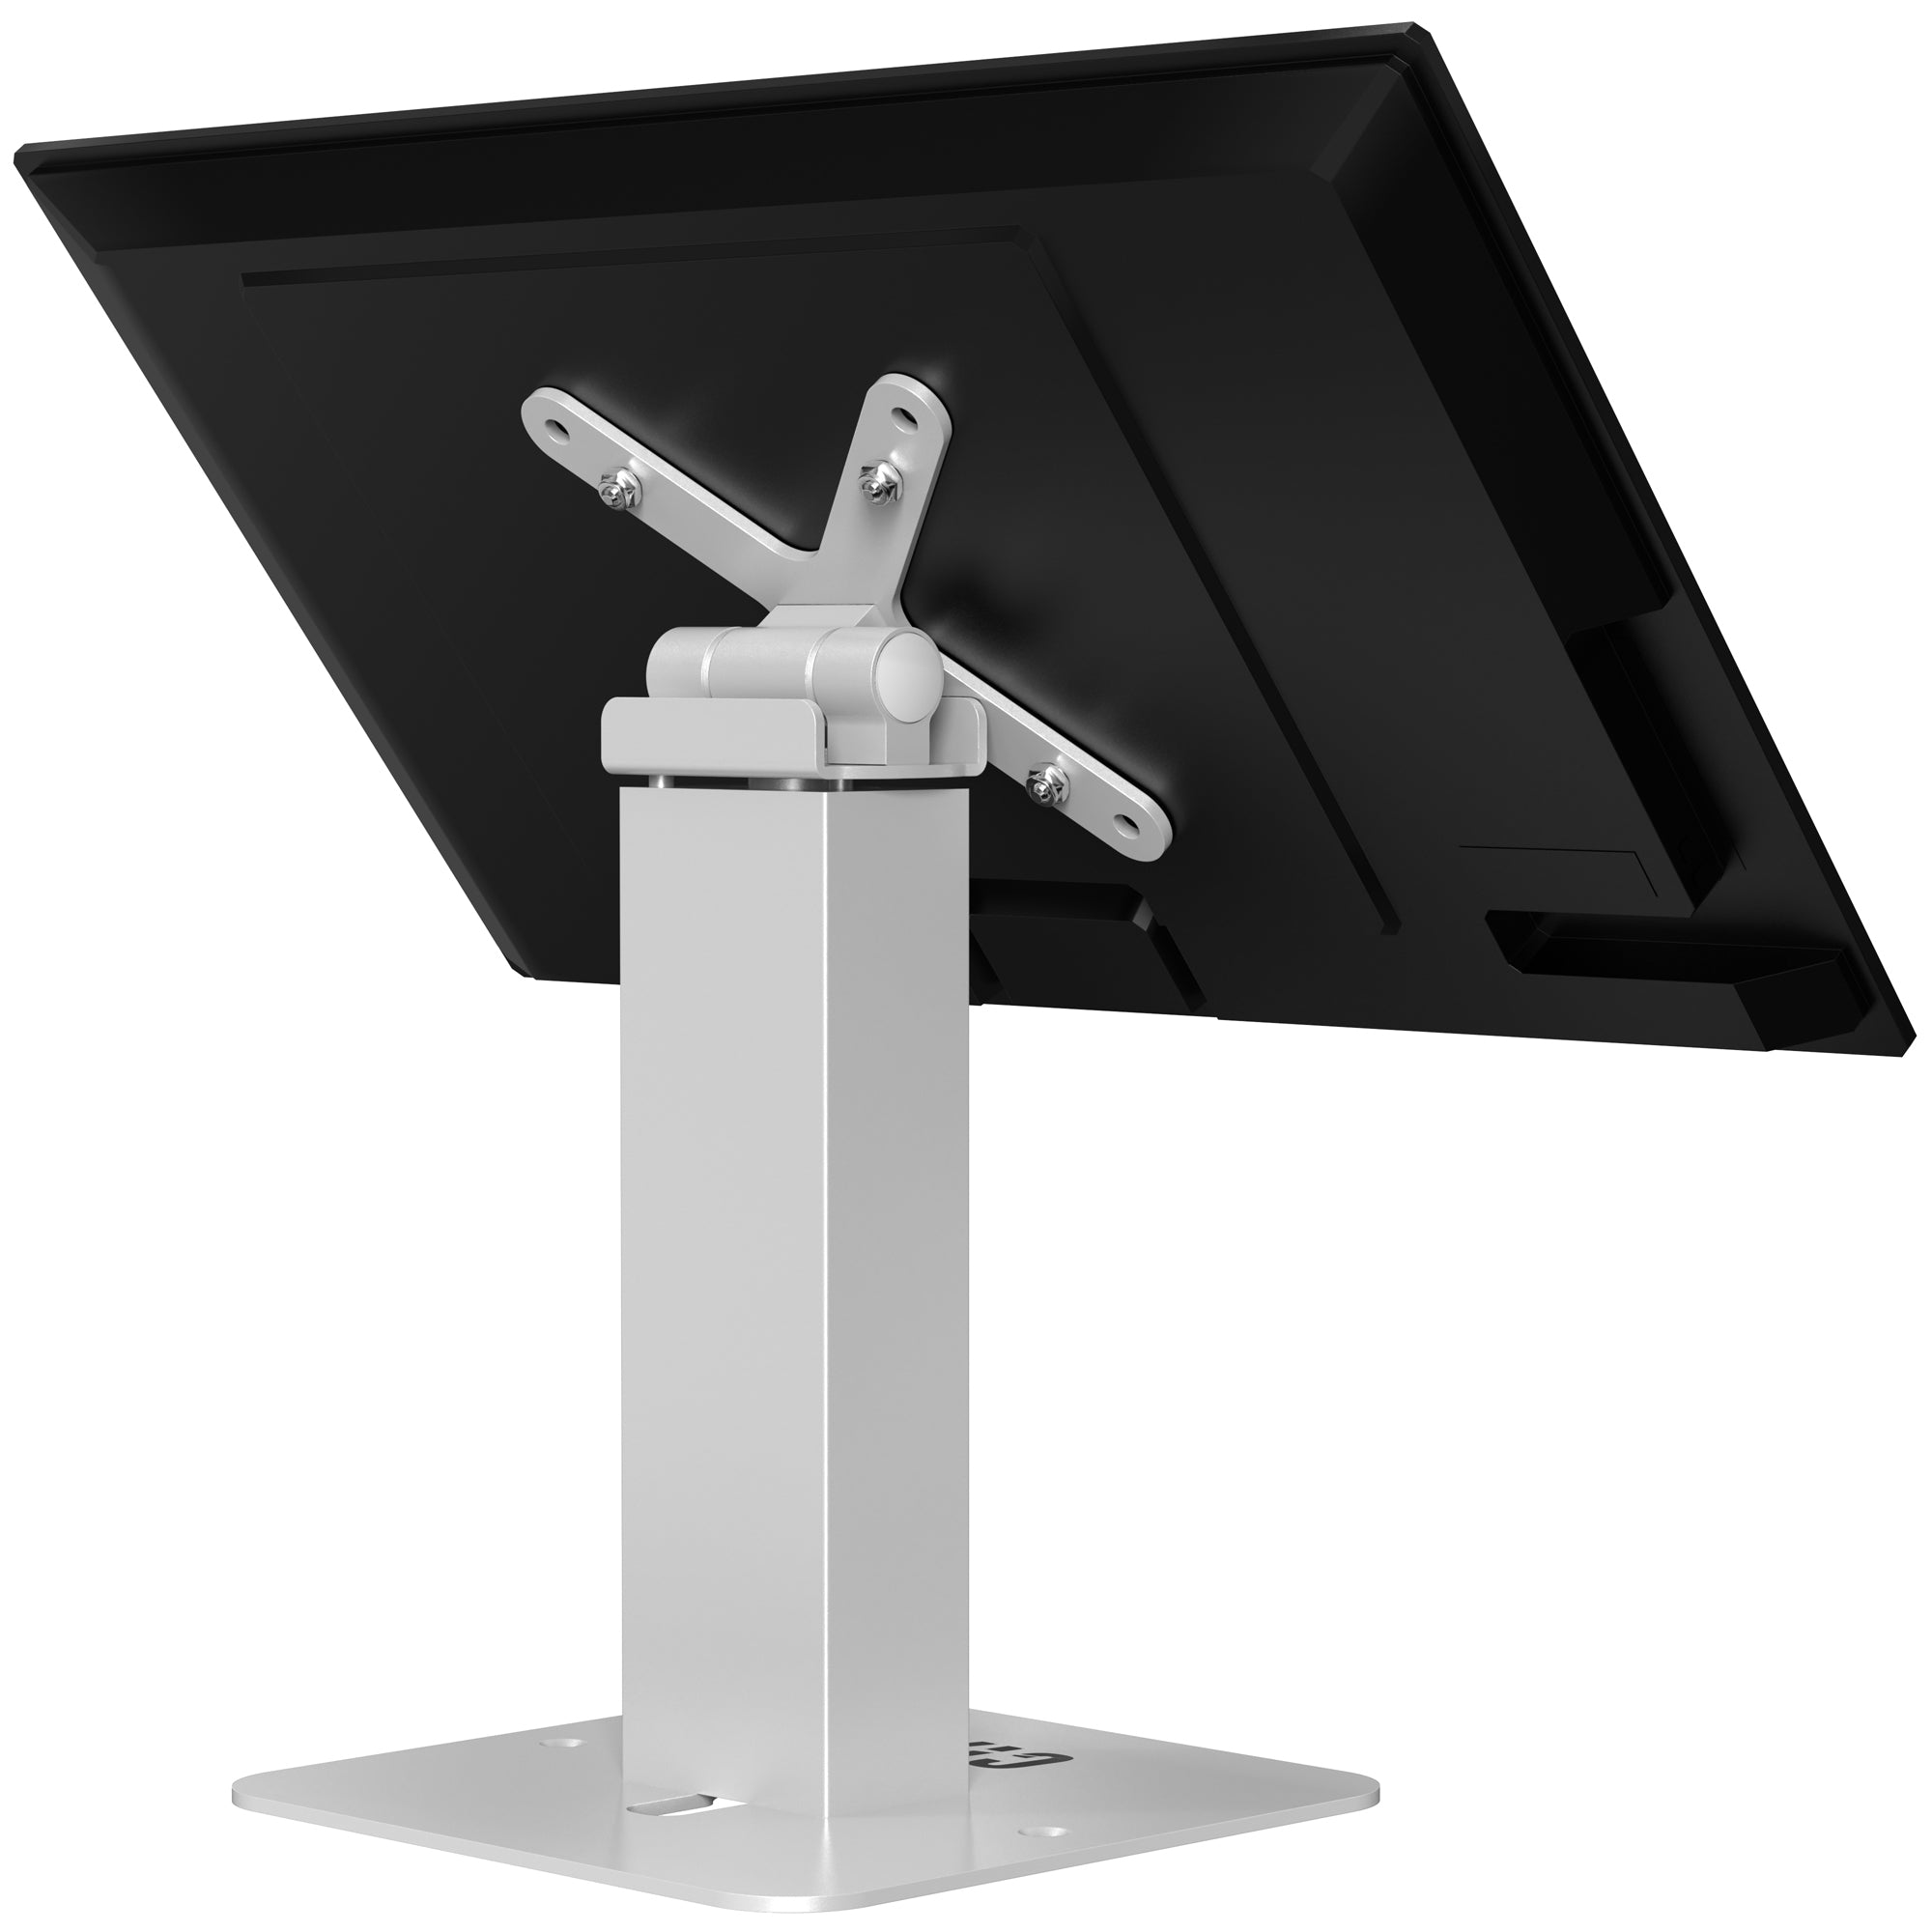 Rotating Sleek Desk Mount for Tablets and Displays up to 11lbs.